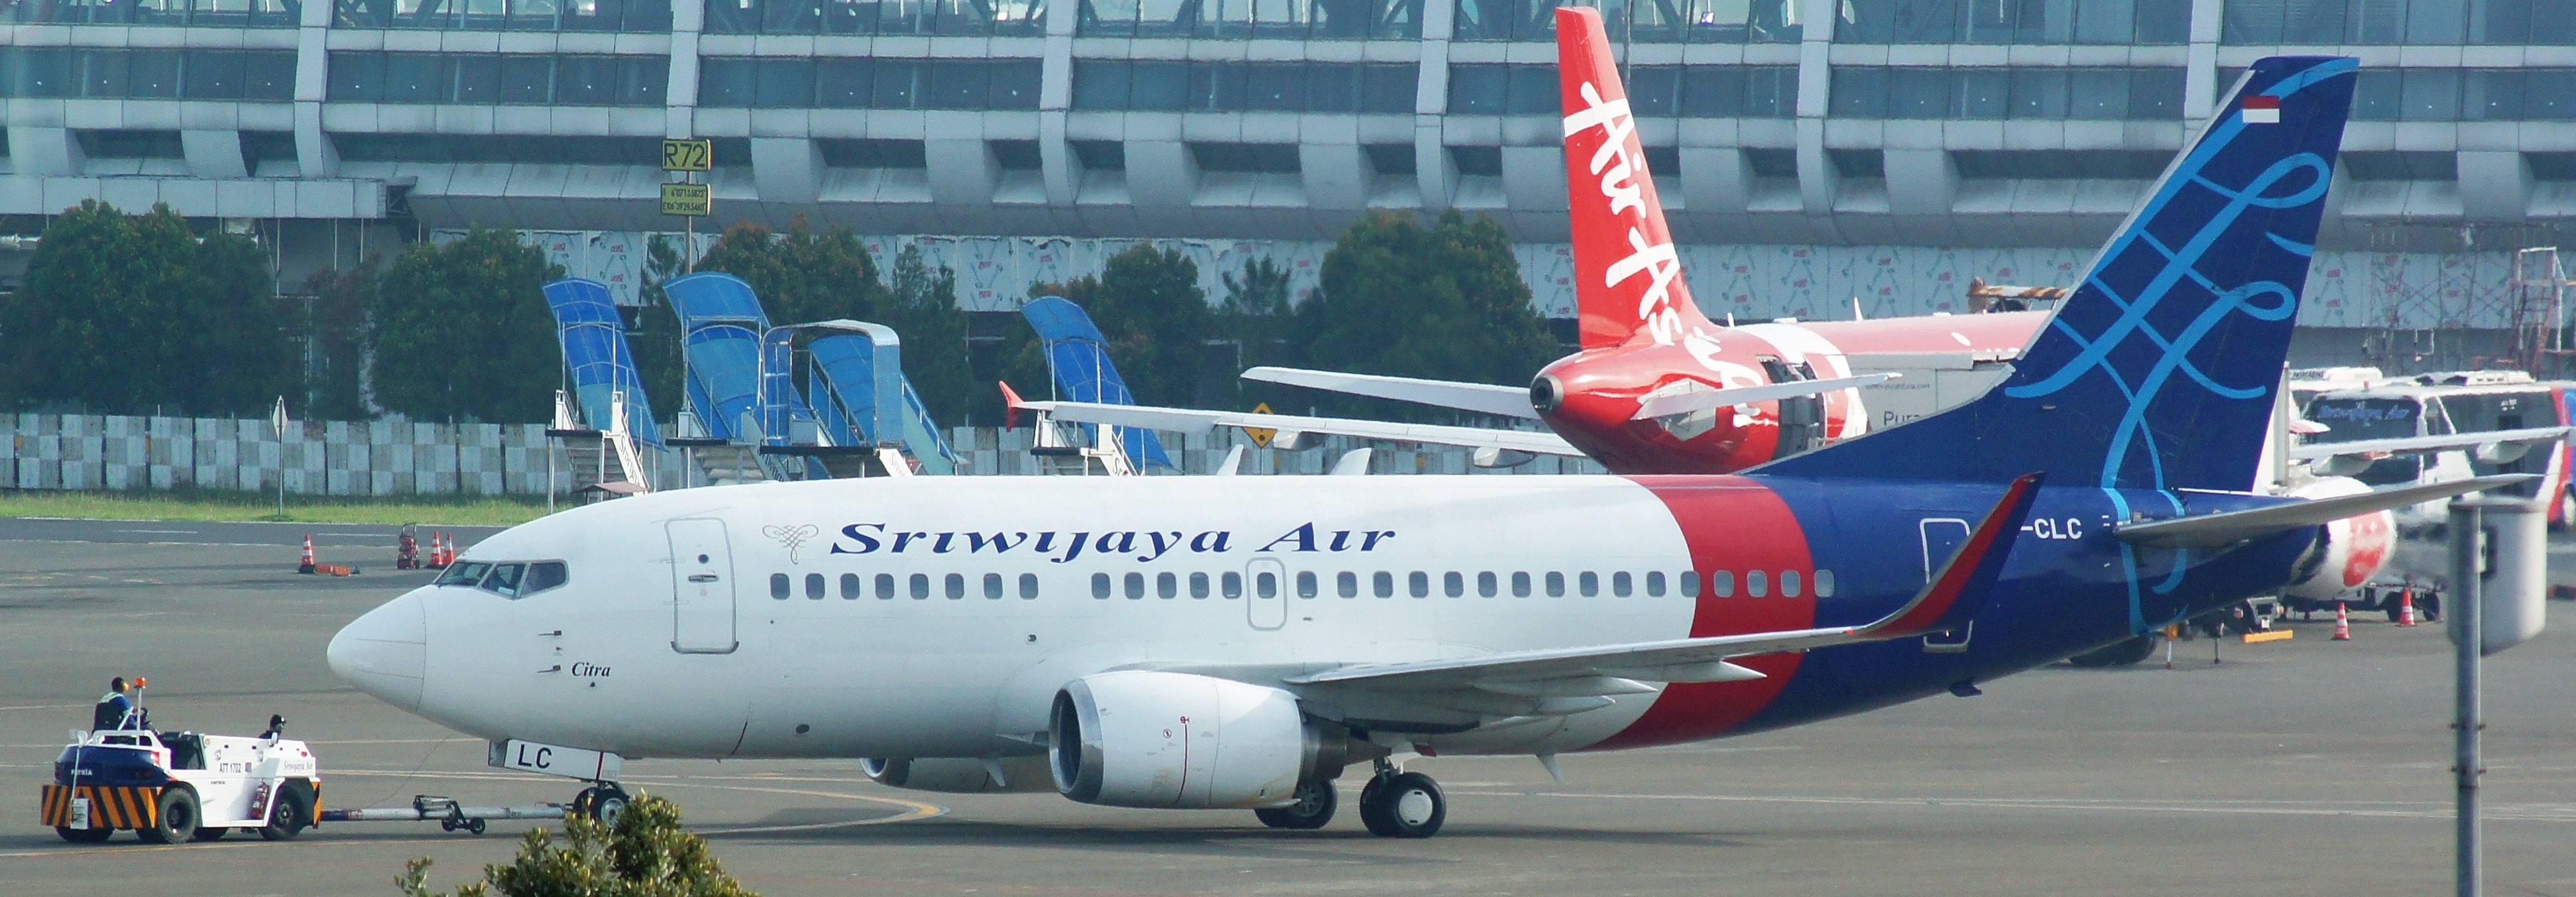 PK-CLC, the aircraft involved in the accident. Here it is pictured in an earlier livery at Soekarno-Hatta International Airport in December 2017